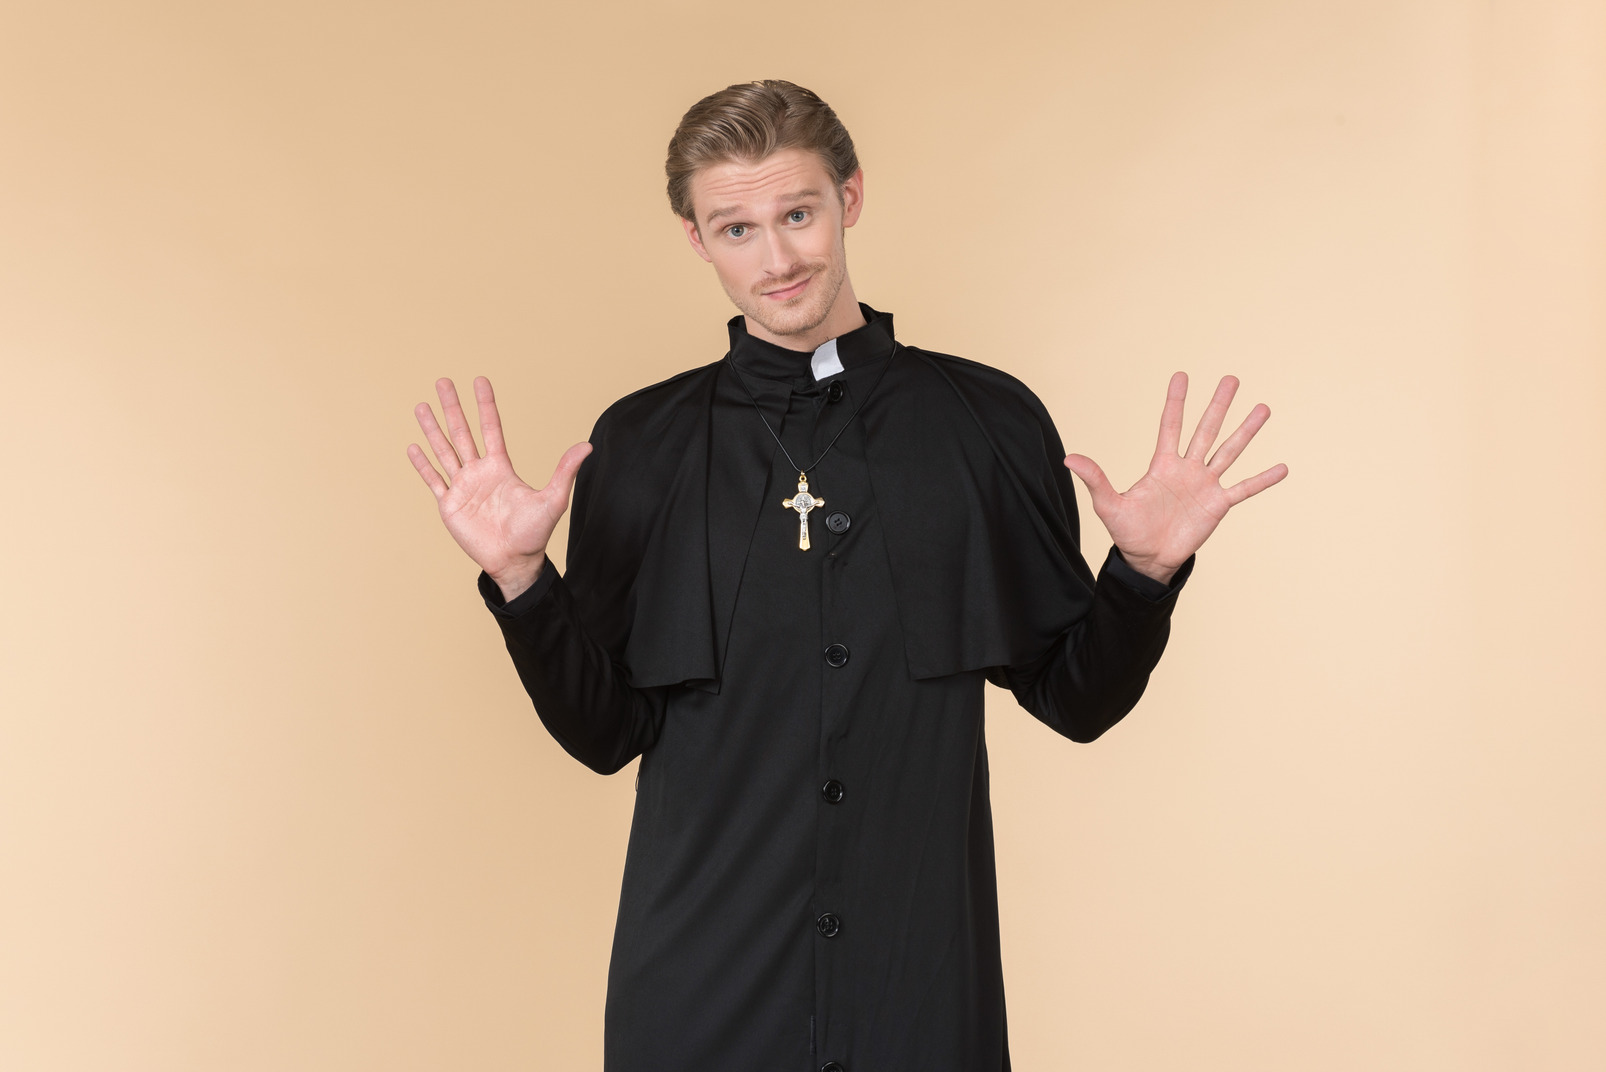 Catholic priest standing with hands aside